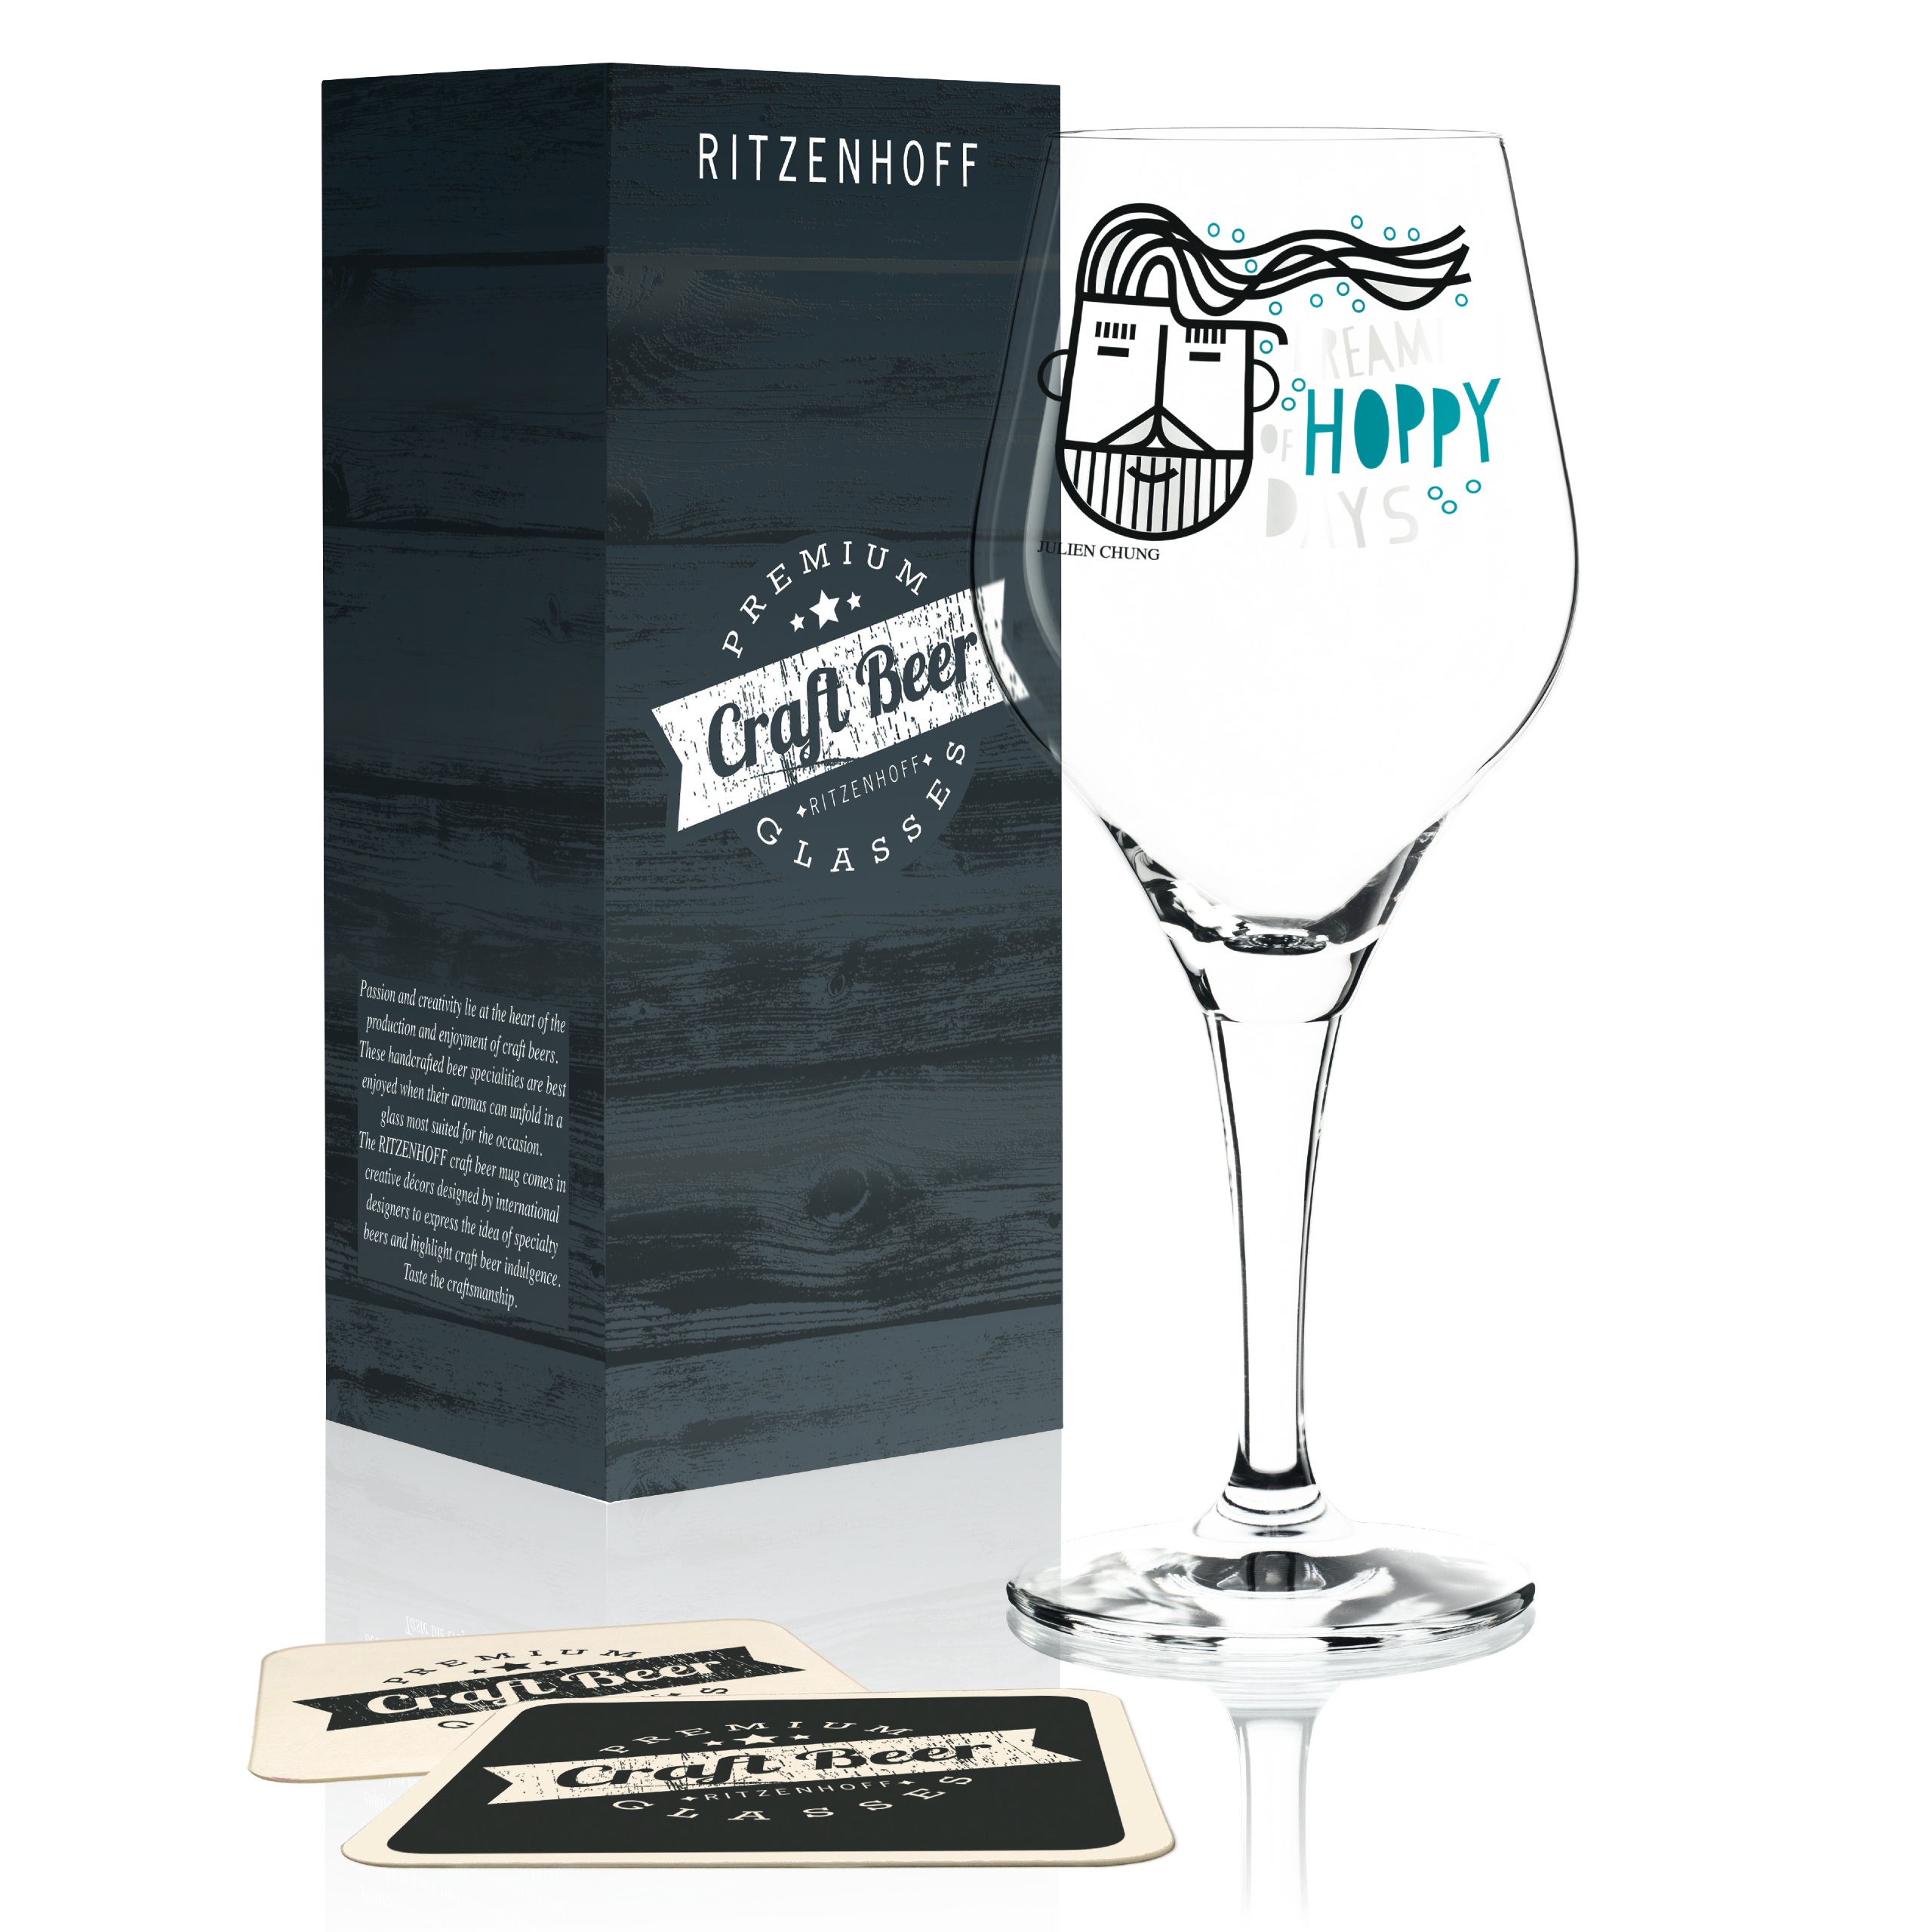 Ritzenhoff Craft glass J. – Beer Chung Box by 2018 beer Direct Craft